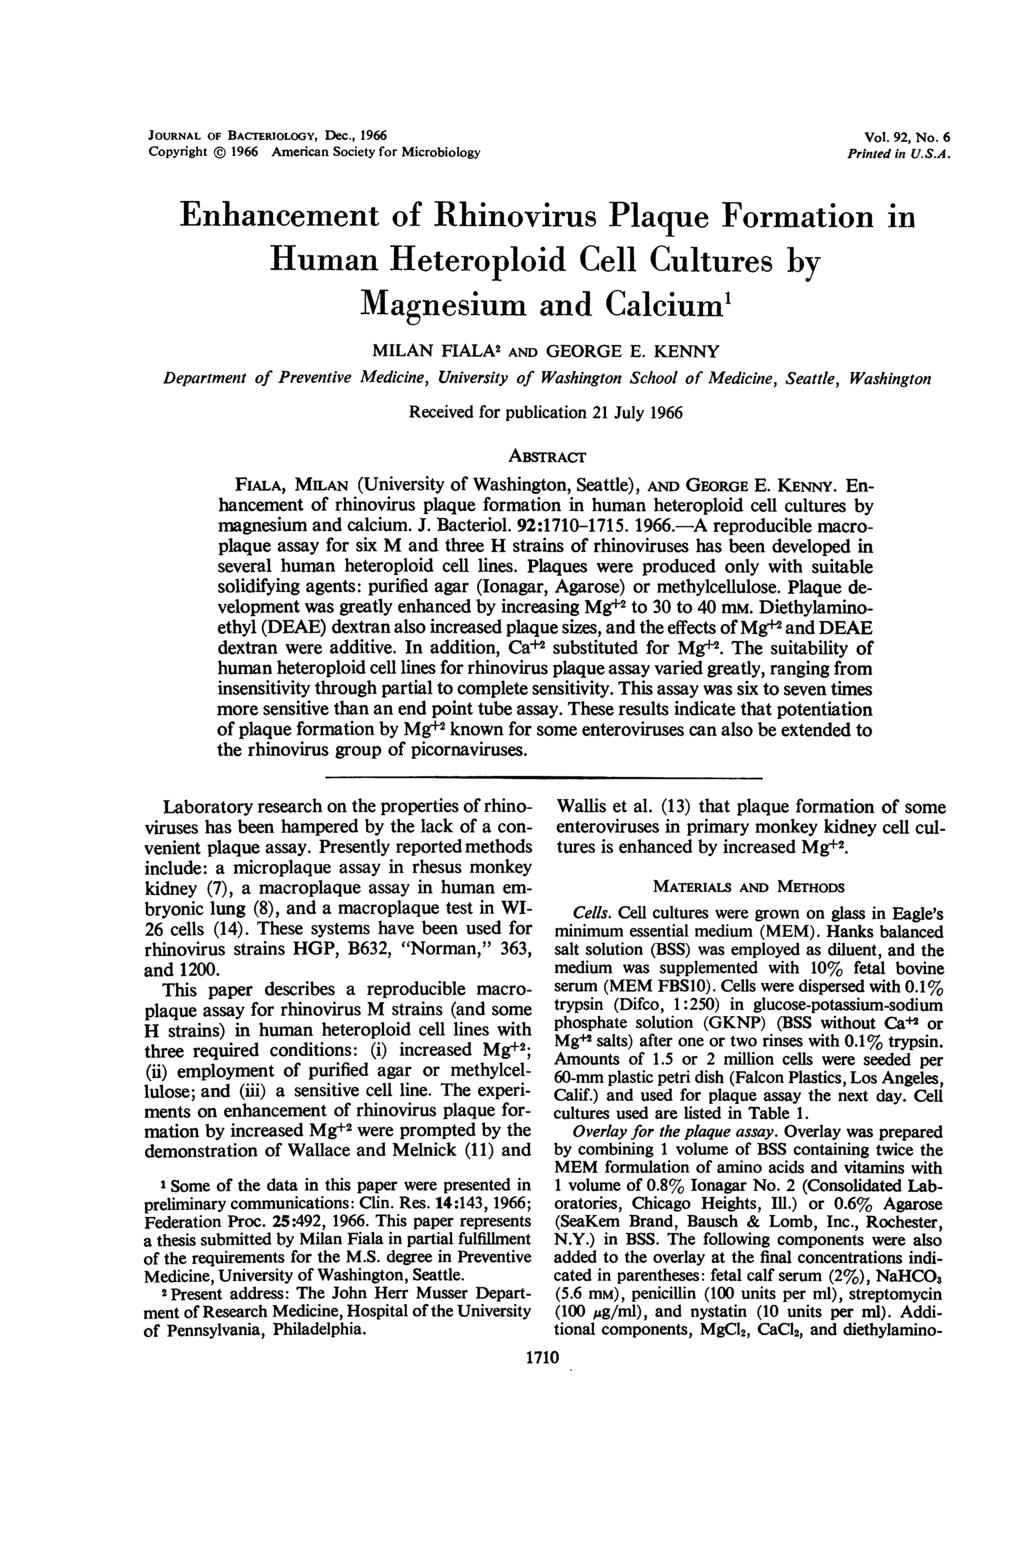 JOURNAL OF BACTERIOLOGY, Dec., 1966 Copyright @ 1966 American Society for Microbiology Vol. 92, No. 6 Printed in U.S.A. Enhancement of Rhinovirus Plaque Formation in Human Heteroploid Cell Cultures by Magnesium and Calcium' MILAN FIALA2 AND GEORGE E.